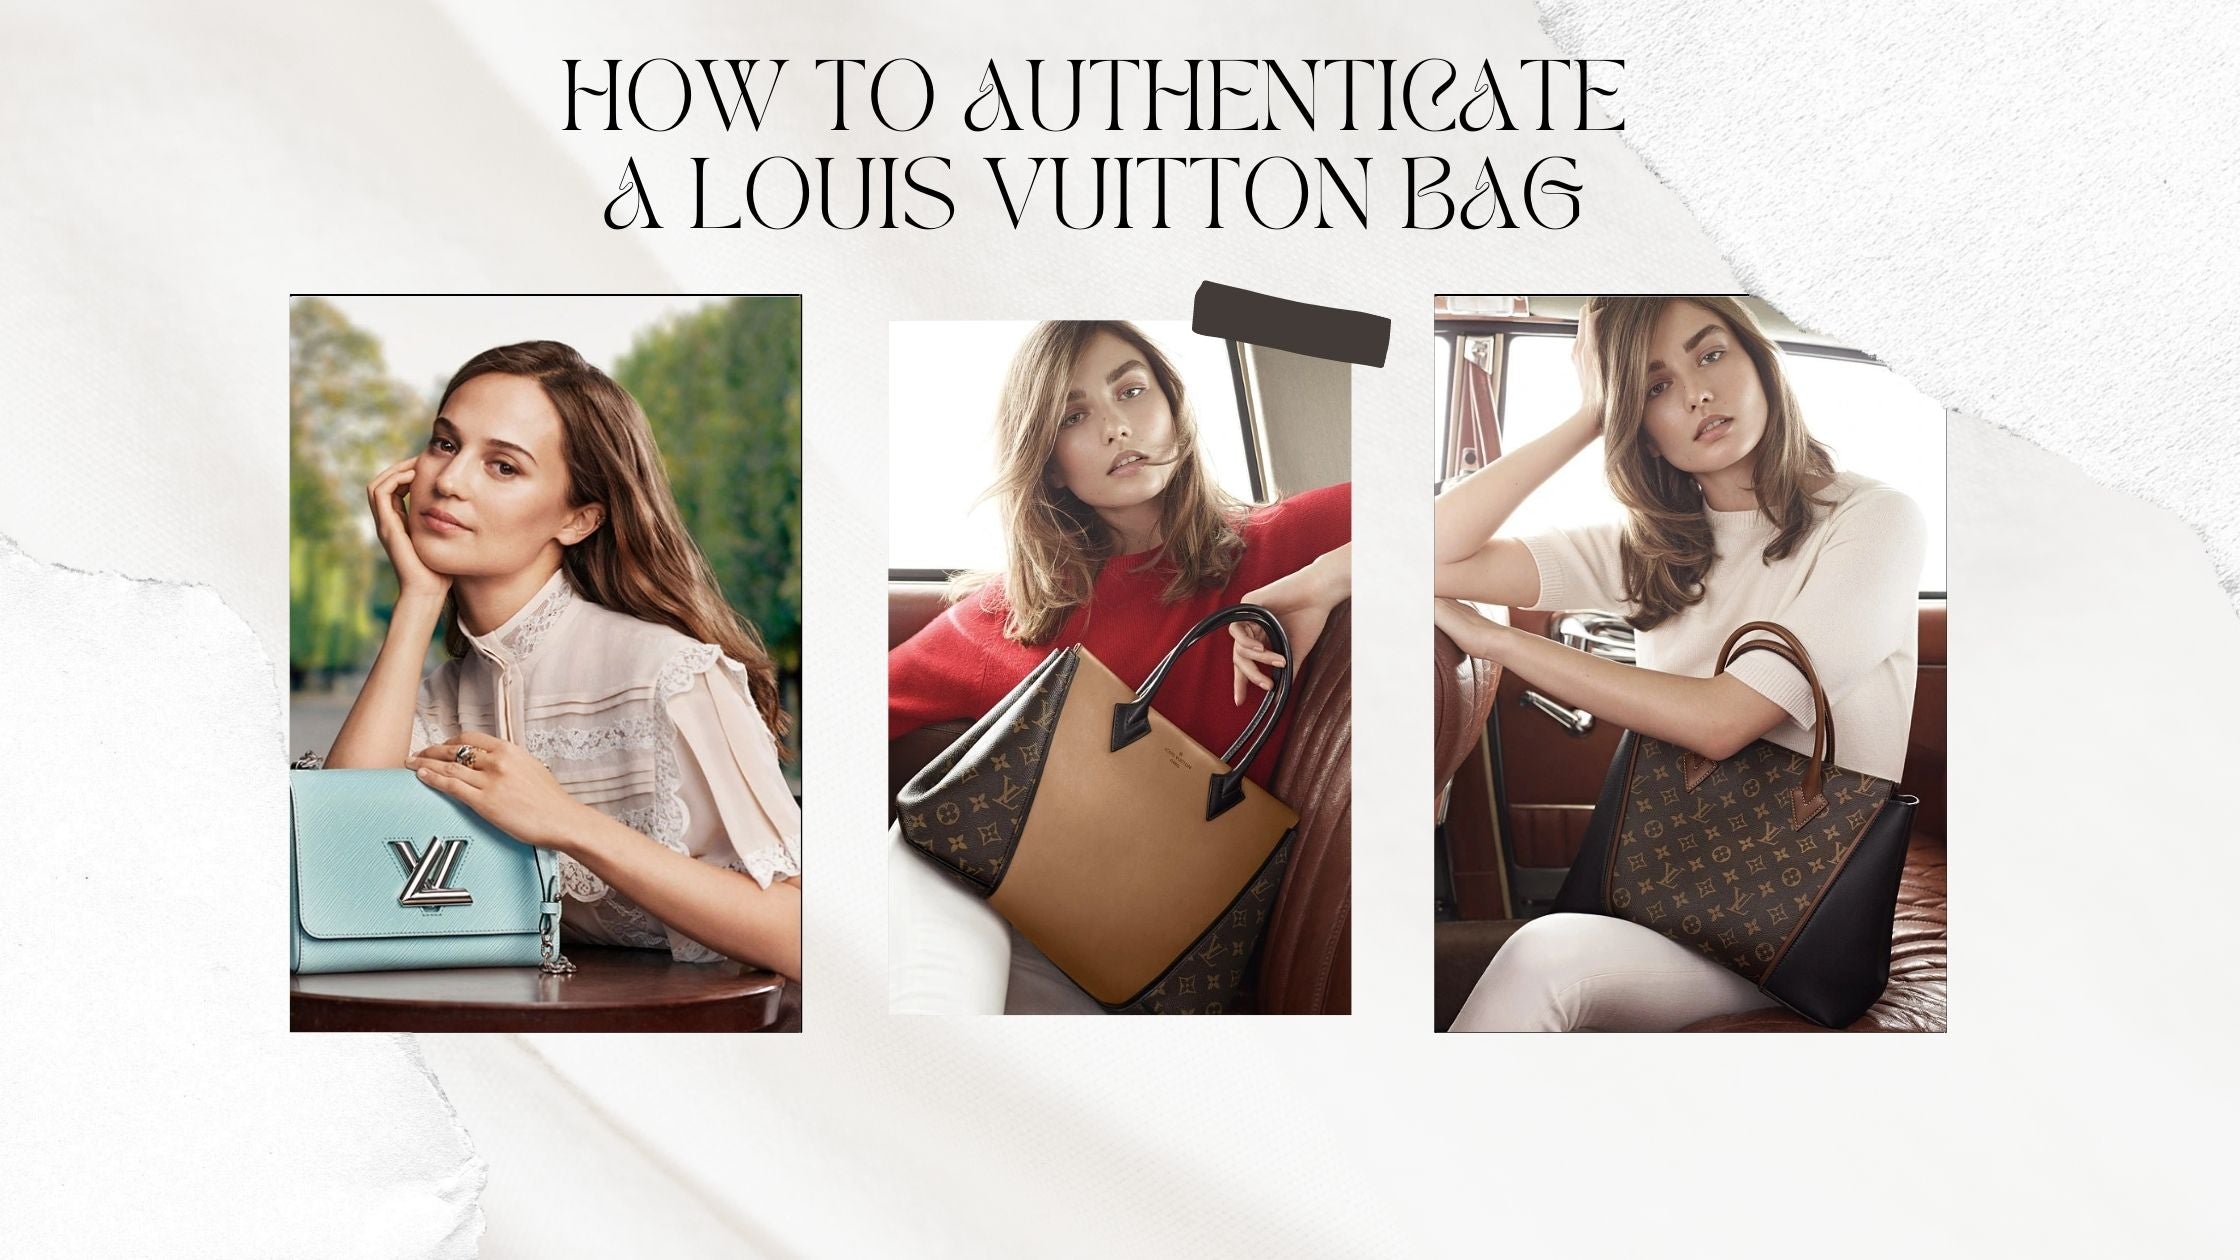 Authenticating Louis Vuitton Designer Handbags: Your Guide to Spotting Fakes